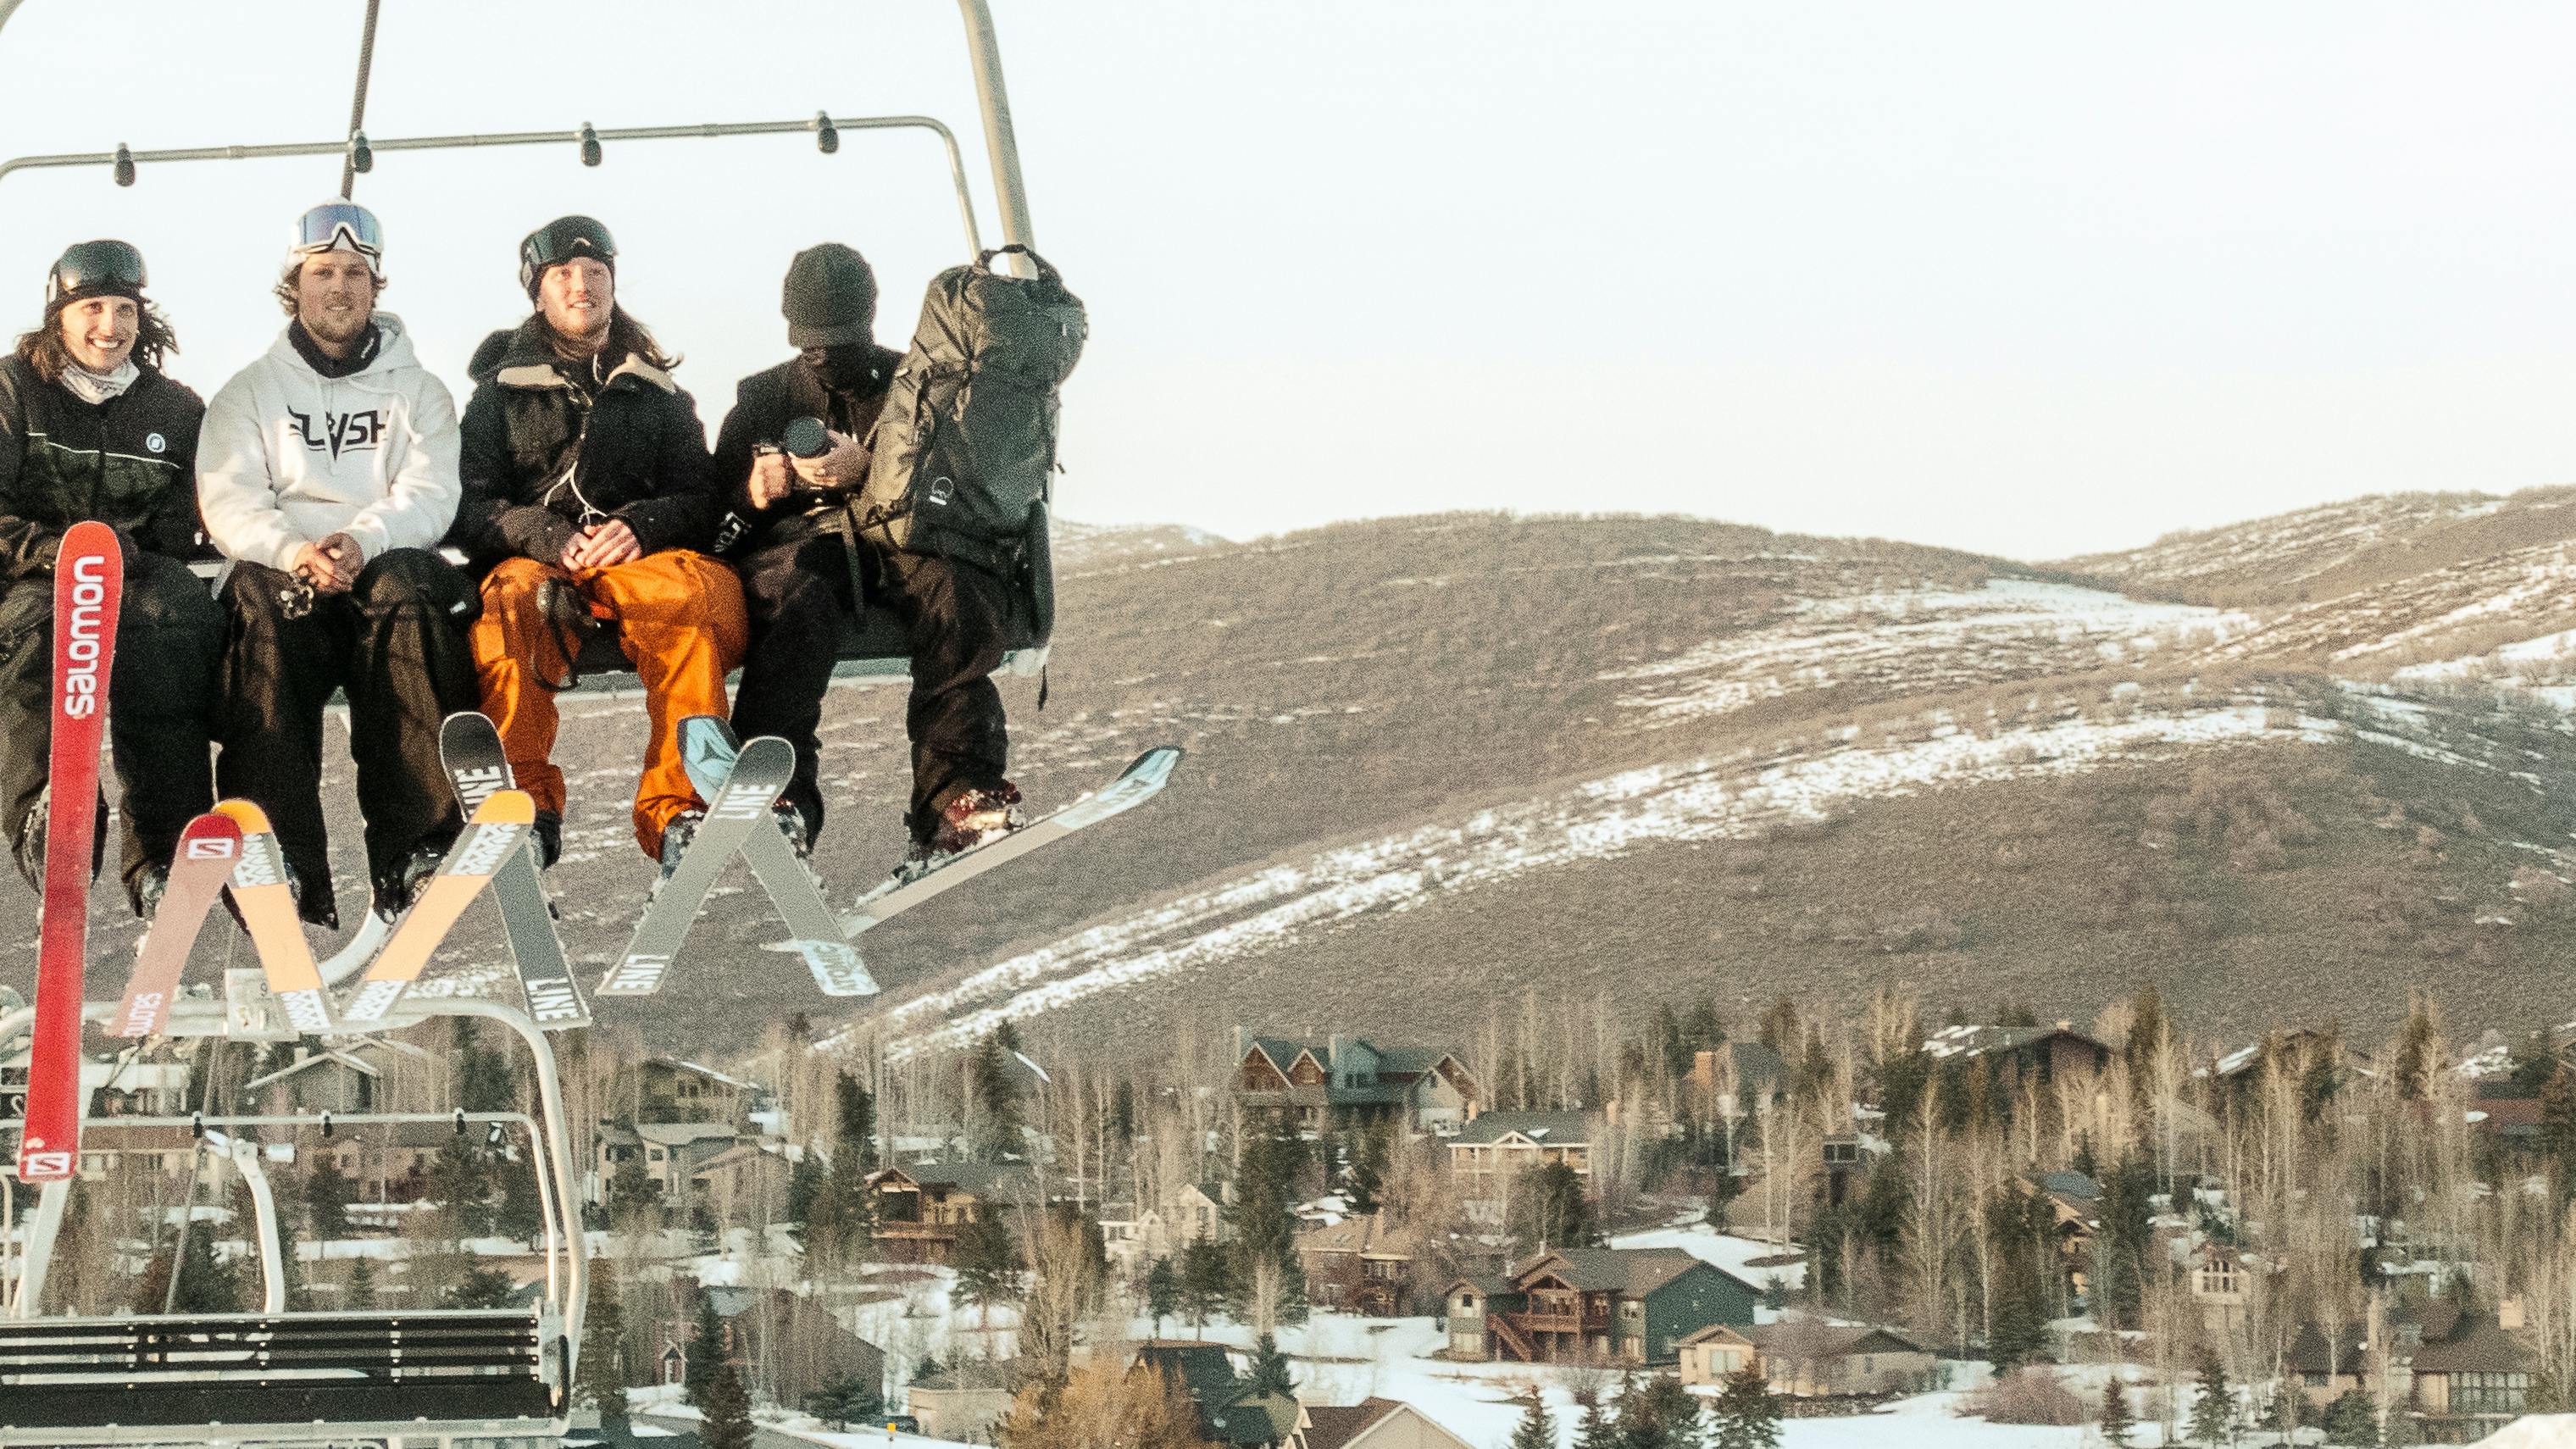 Four skiers on a chairlift. They are all wearing light jackets or hoodies. There is a mountain in the background that has very little snow on it. 